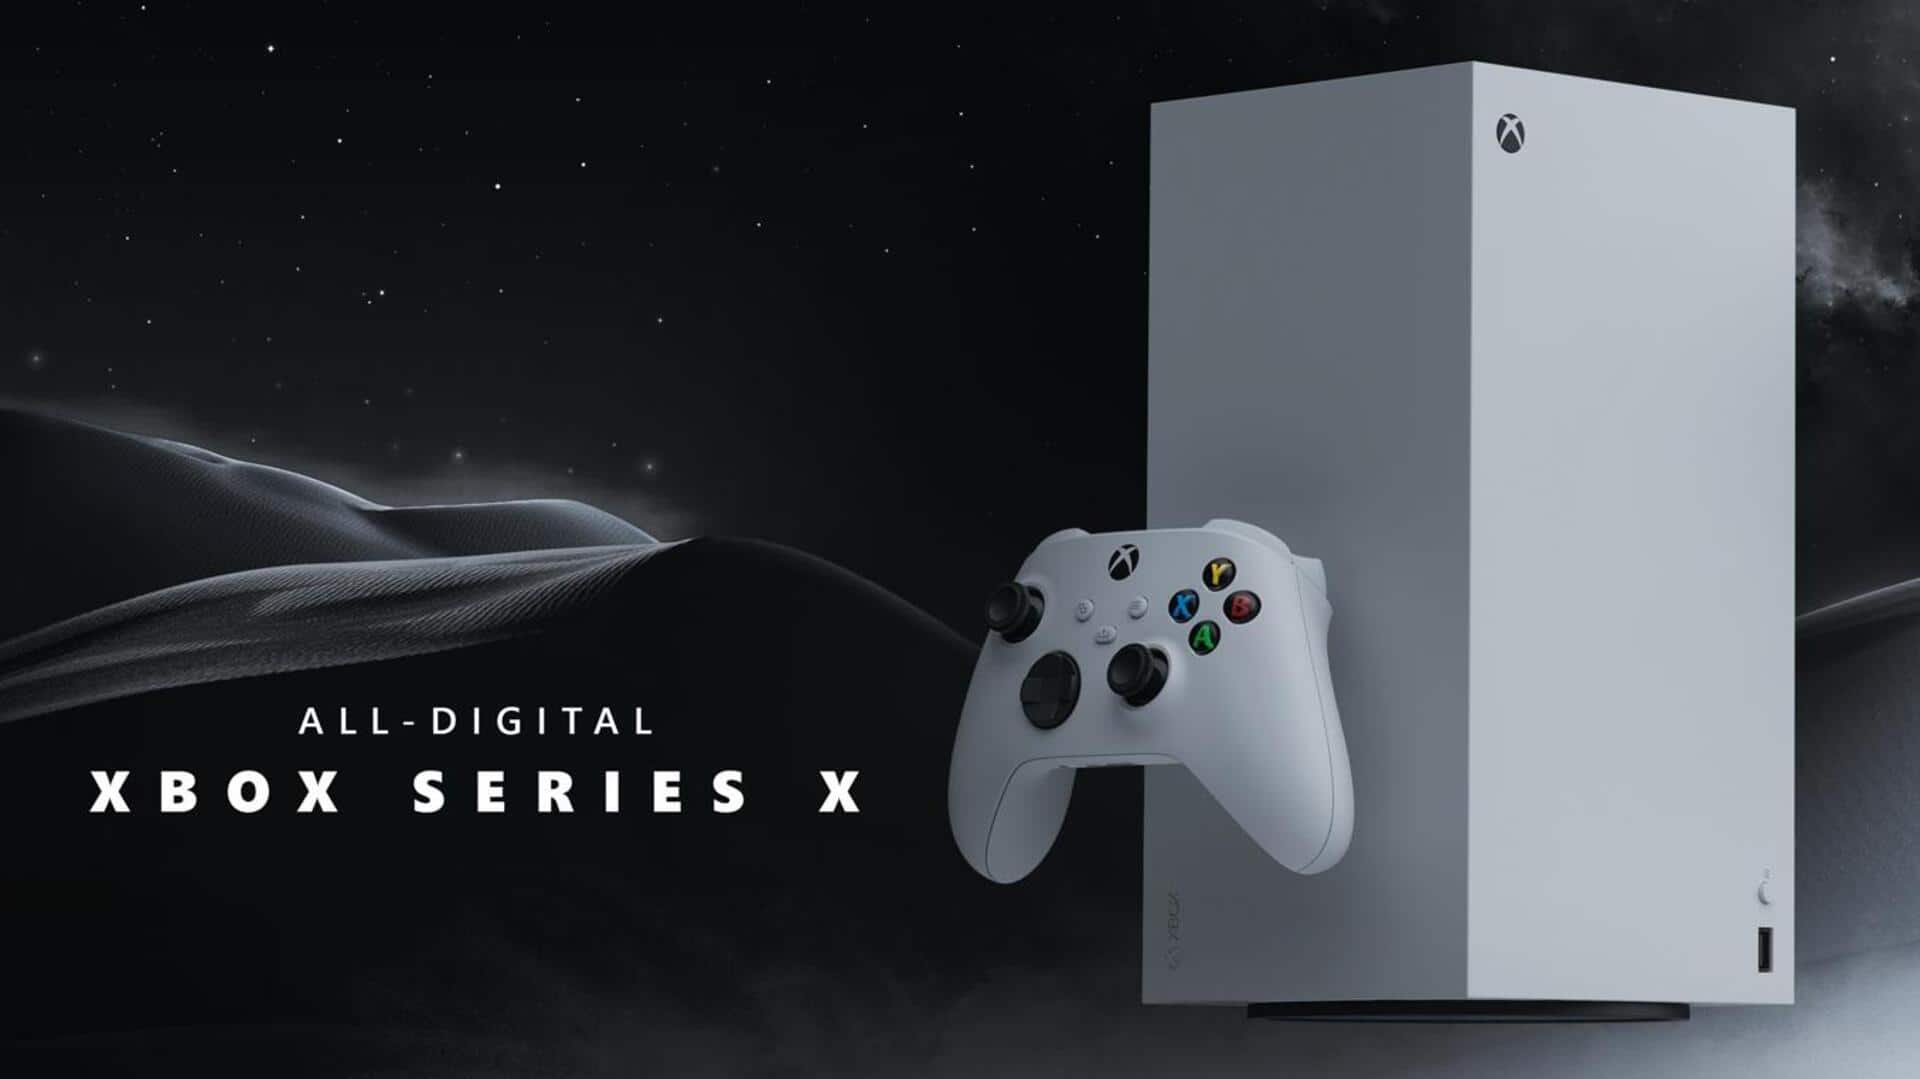 Microsoft unveils all-digital Xbox Series X in new white colorway